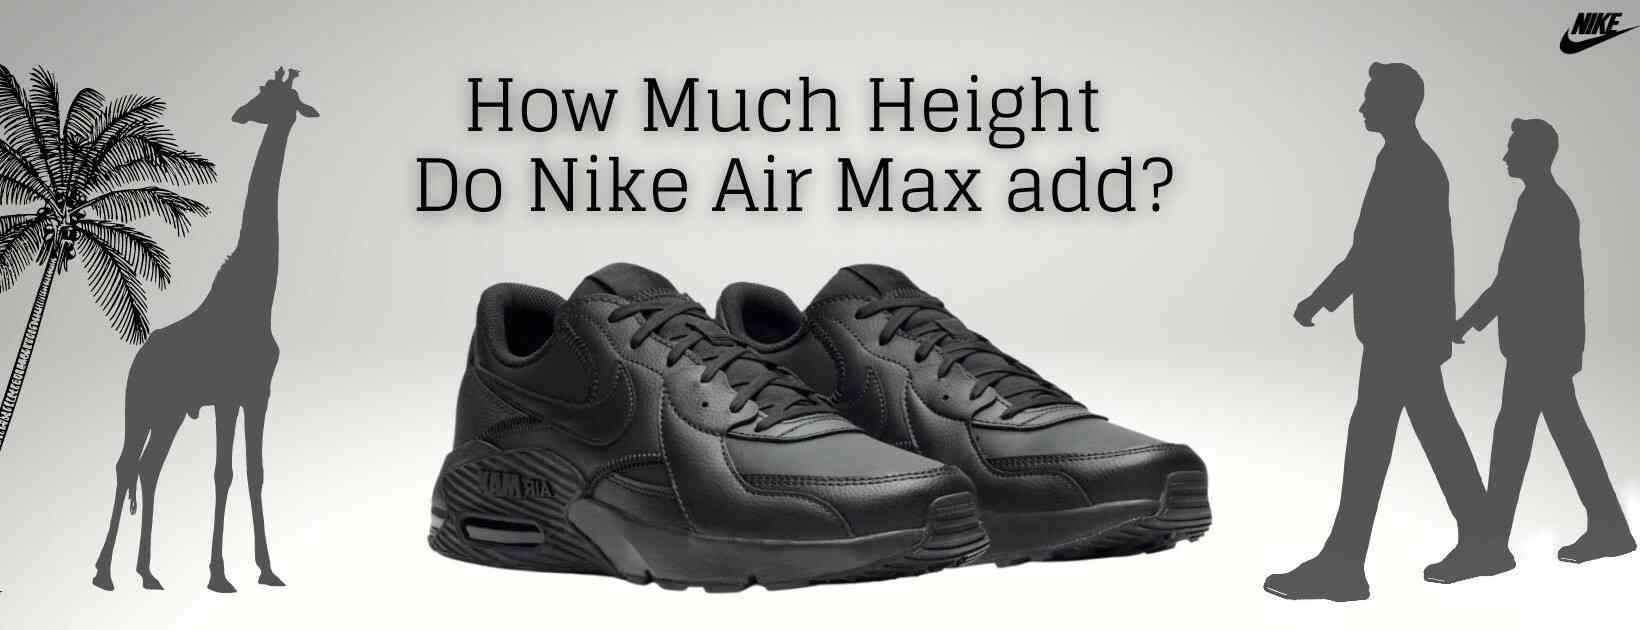 How Much Height Do Nike Air Max add